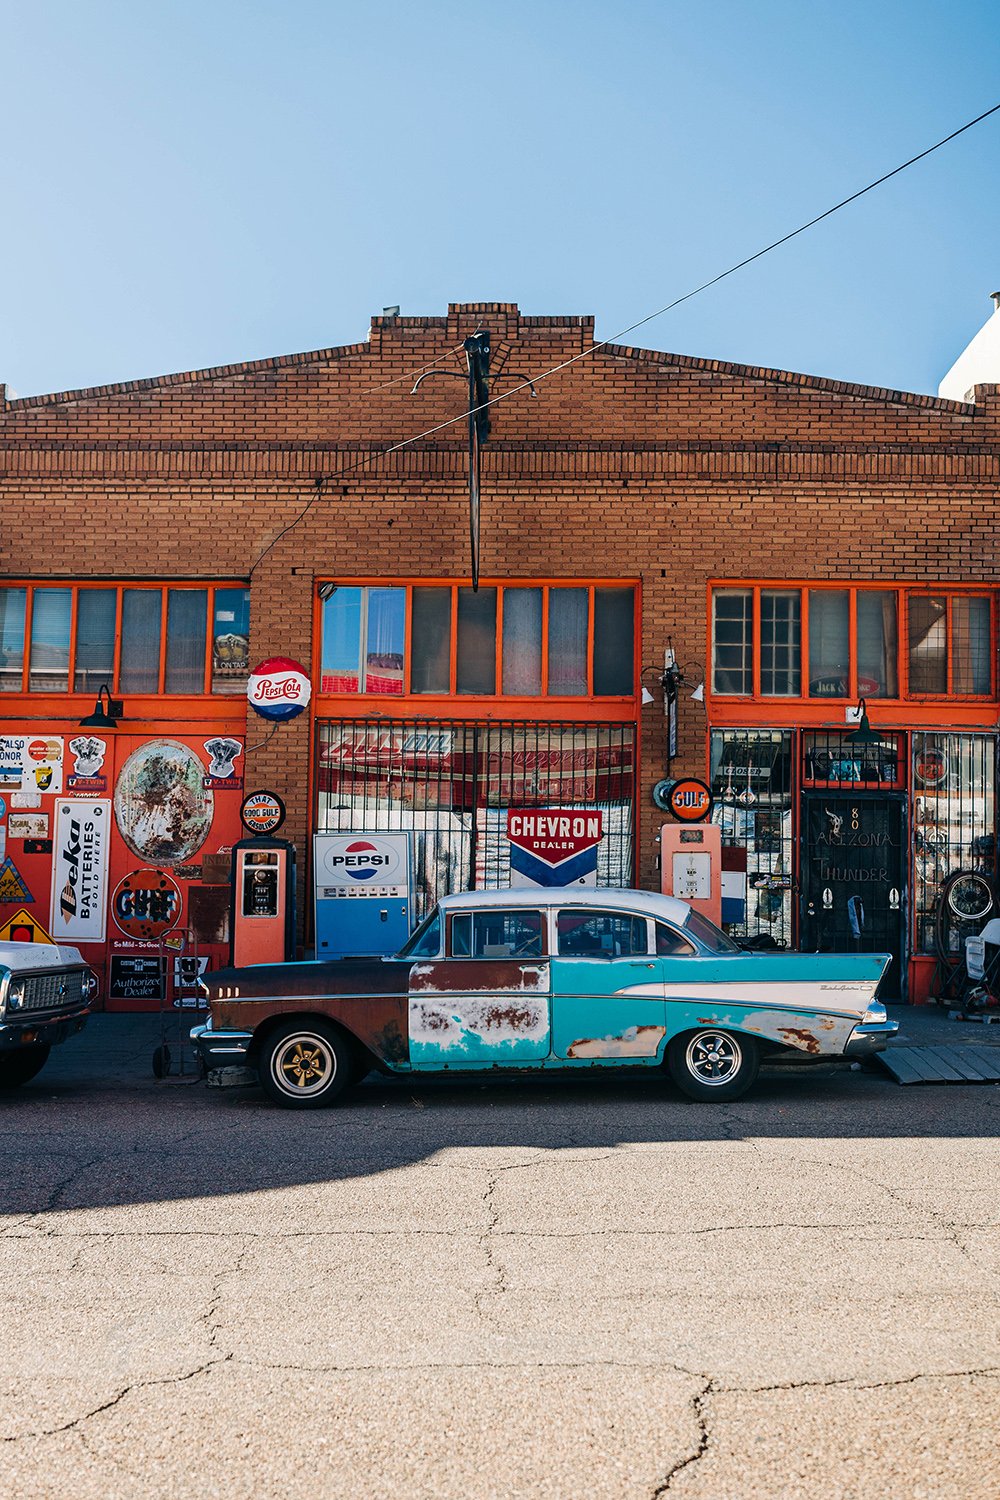 Retro cars line the streets of a historical area in Bisbee, Arizona.